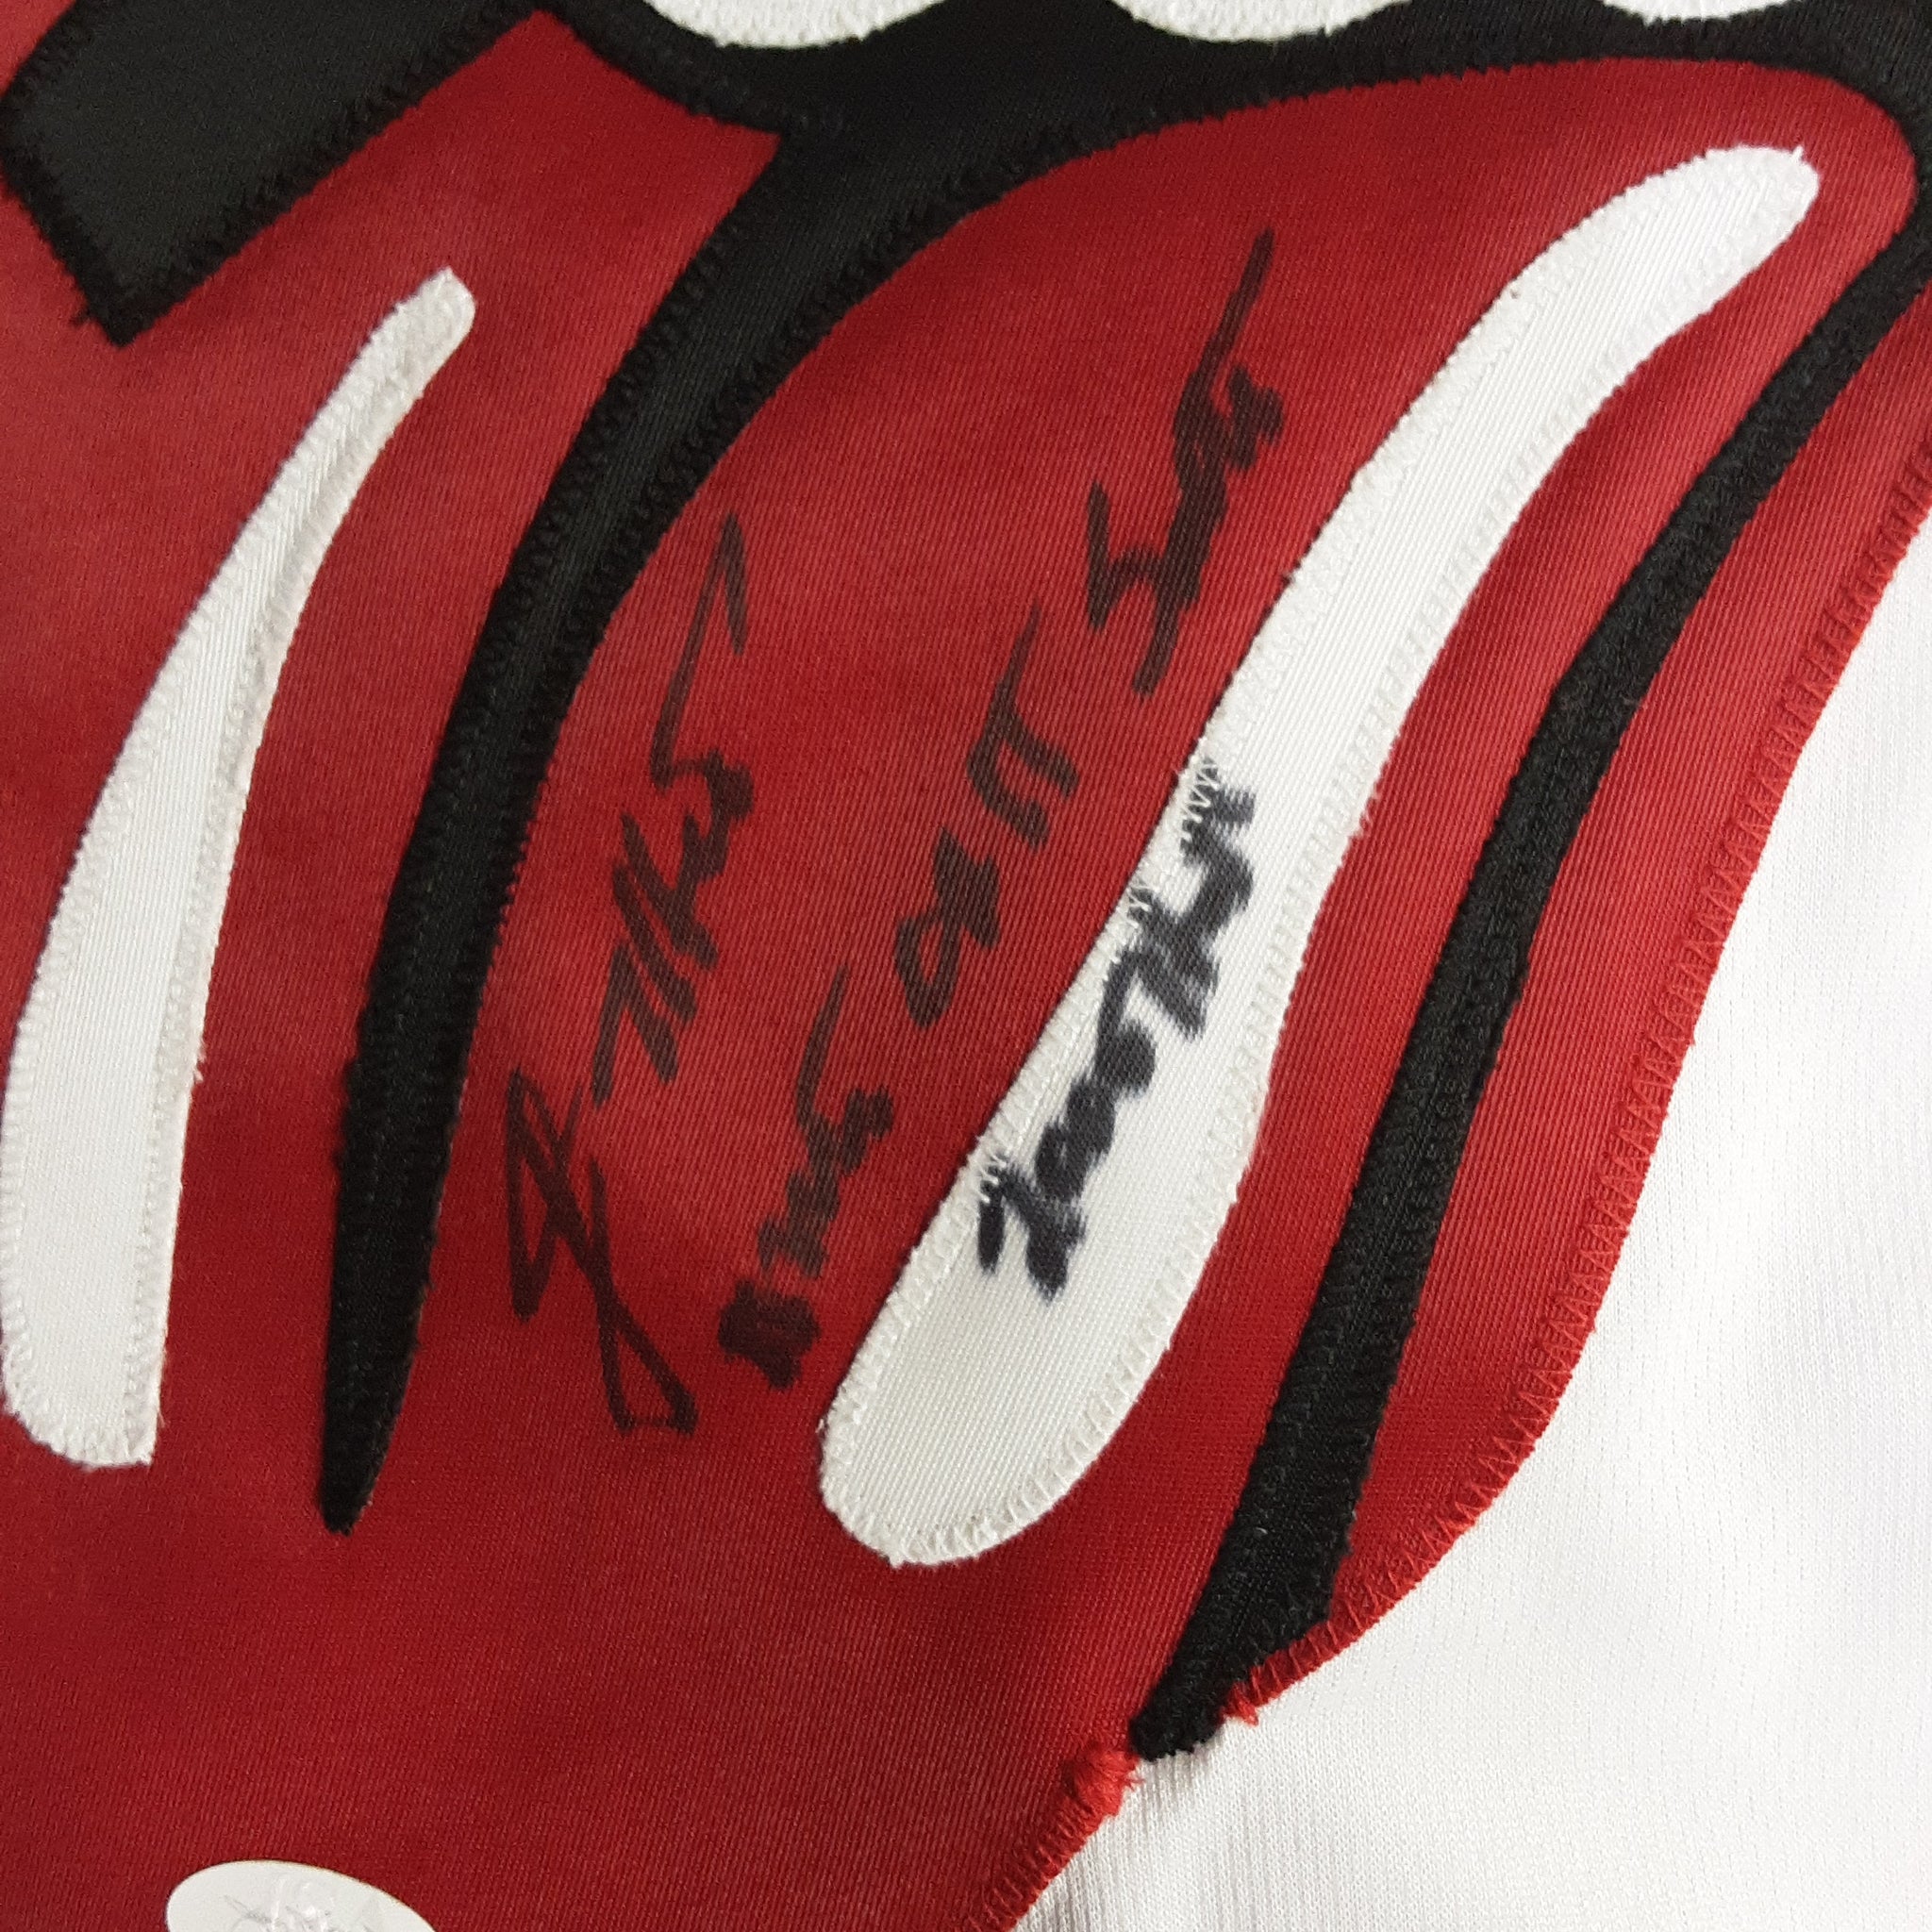 Jimmy Hart Authentic Autographed Signed with Inscription Jersey JSA-